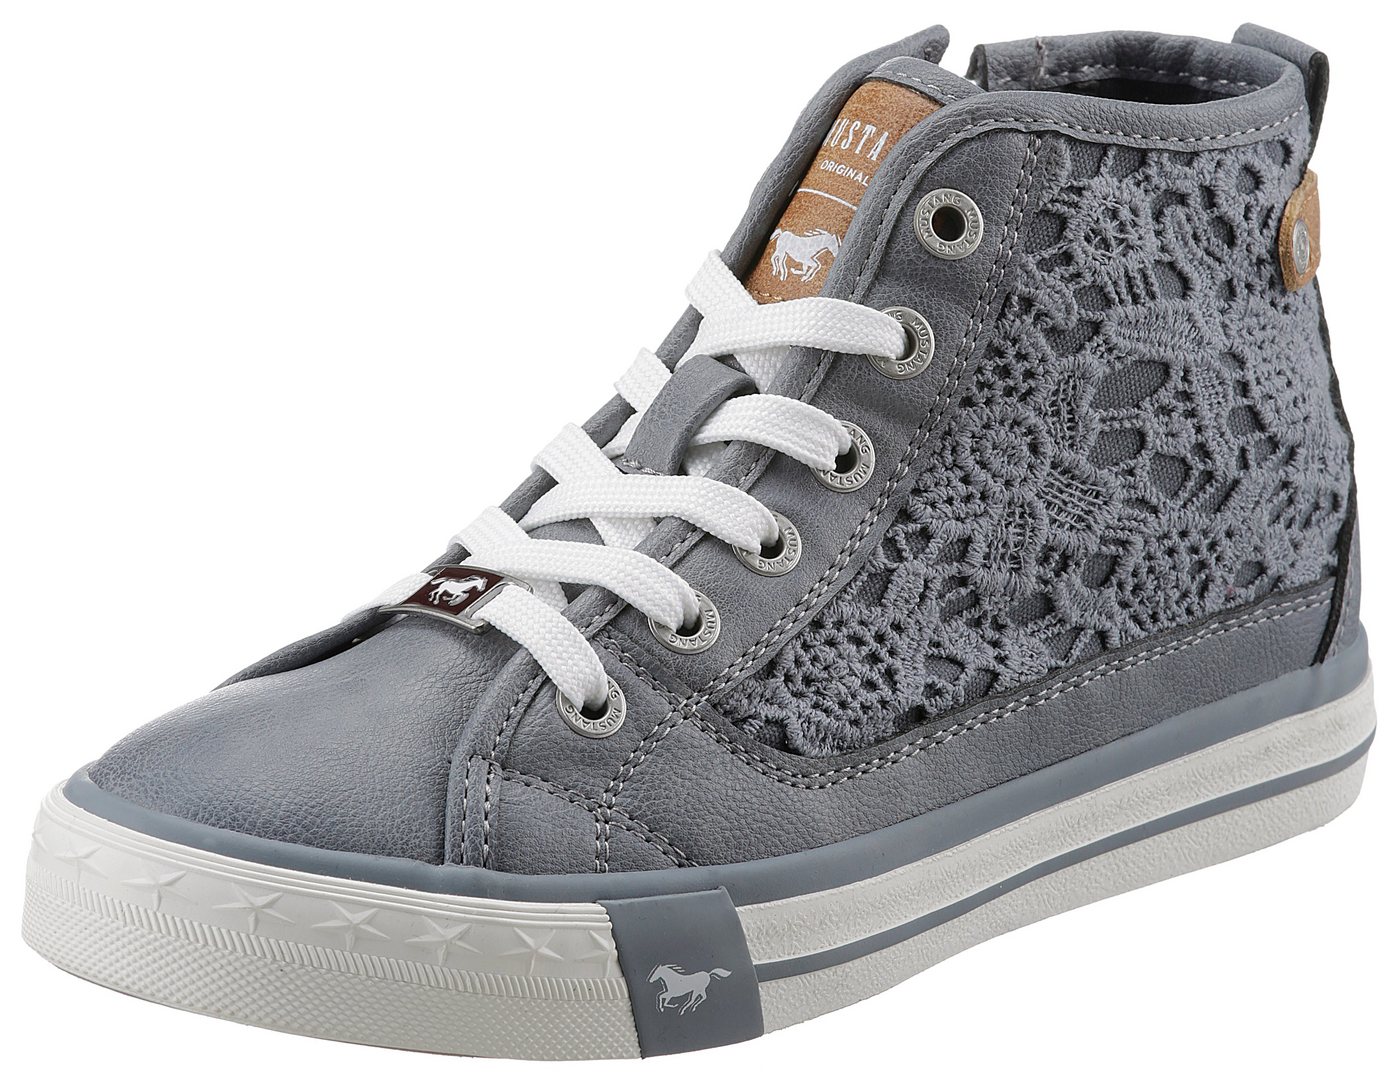 Mustang Shoes Sneaker mit schöner Perforation von Mustang Shoes